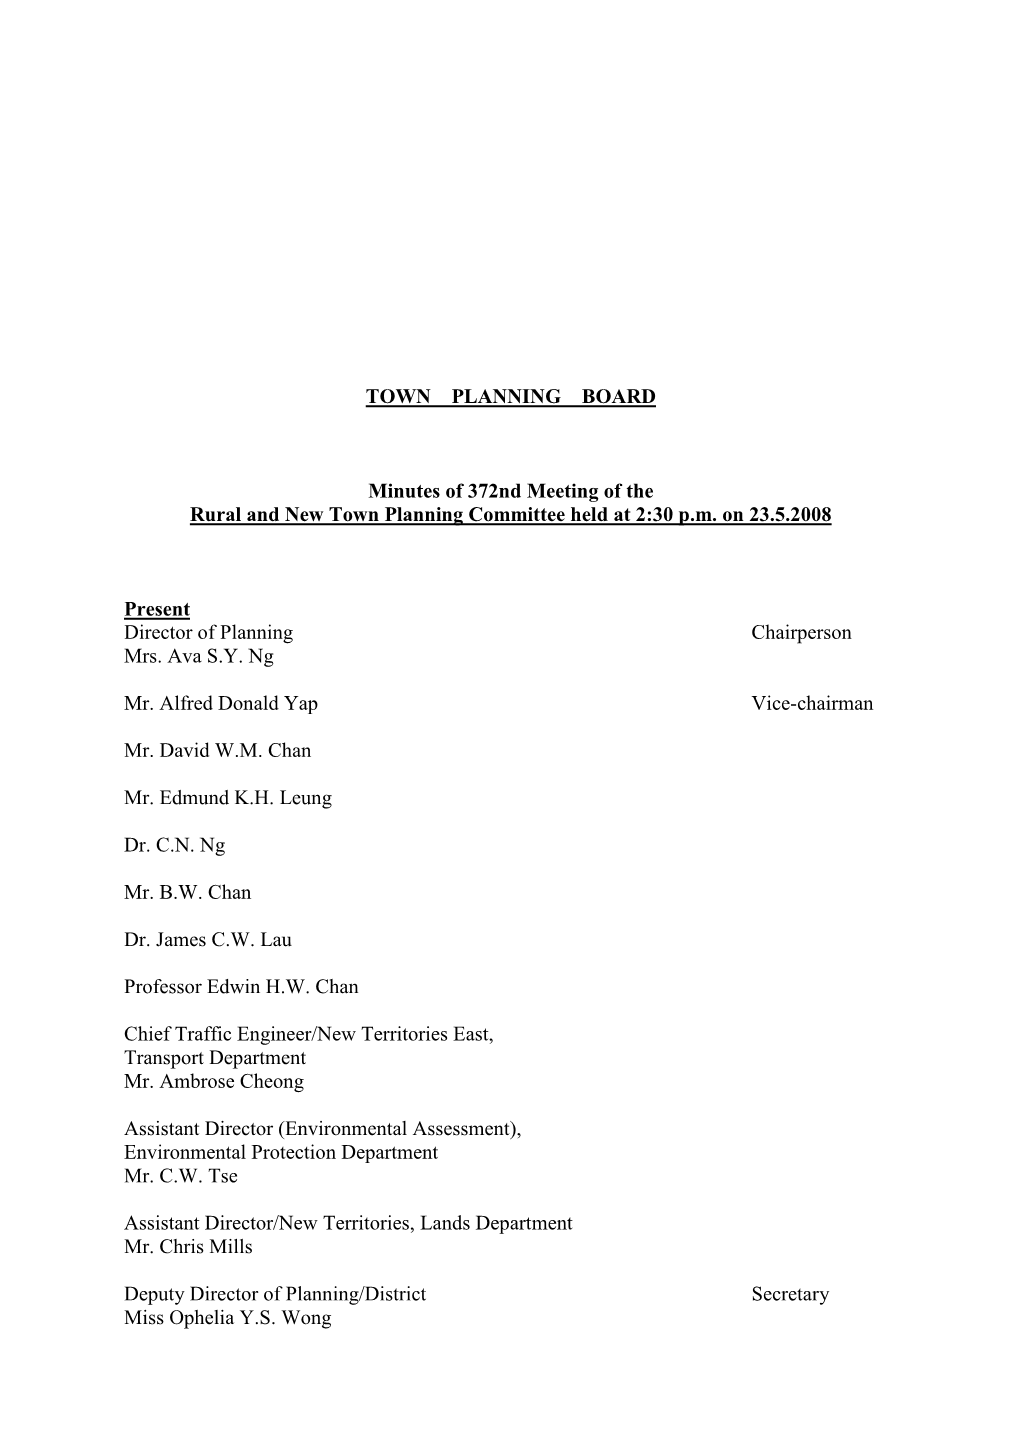 TOWN PLANNING BOARD Minutes of 372Nd Meeting of the Rural And